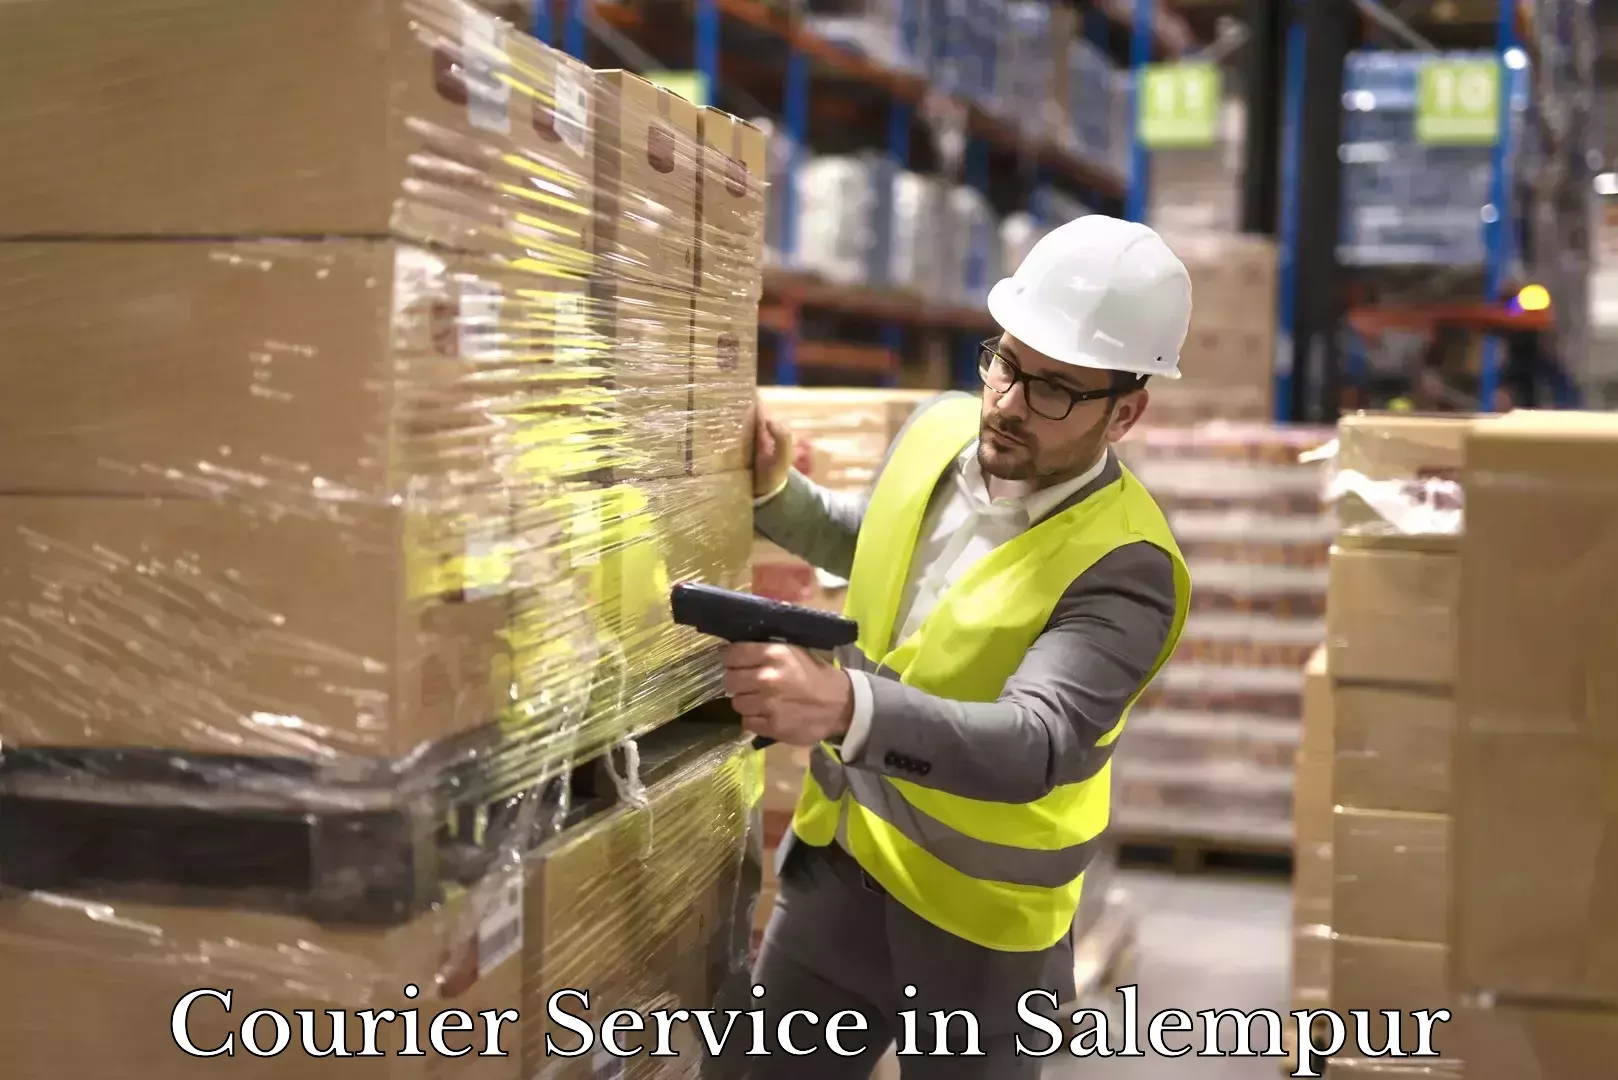 Dynamic courier operations in Salempur